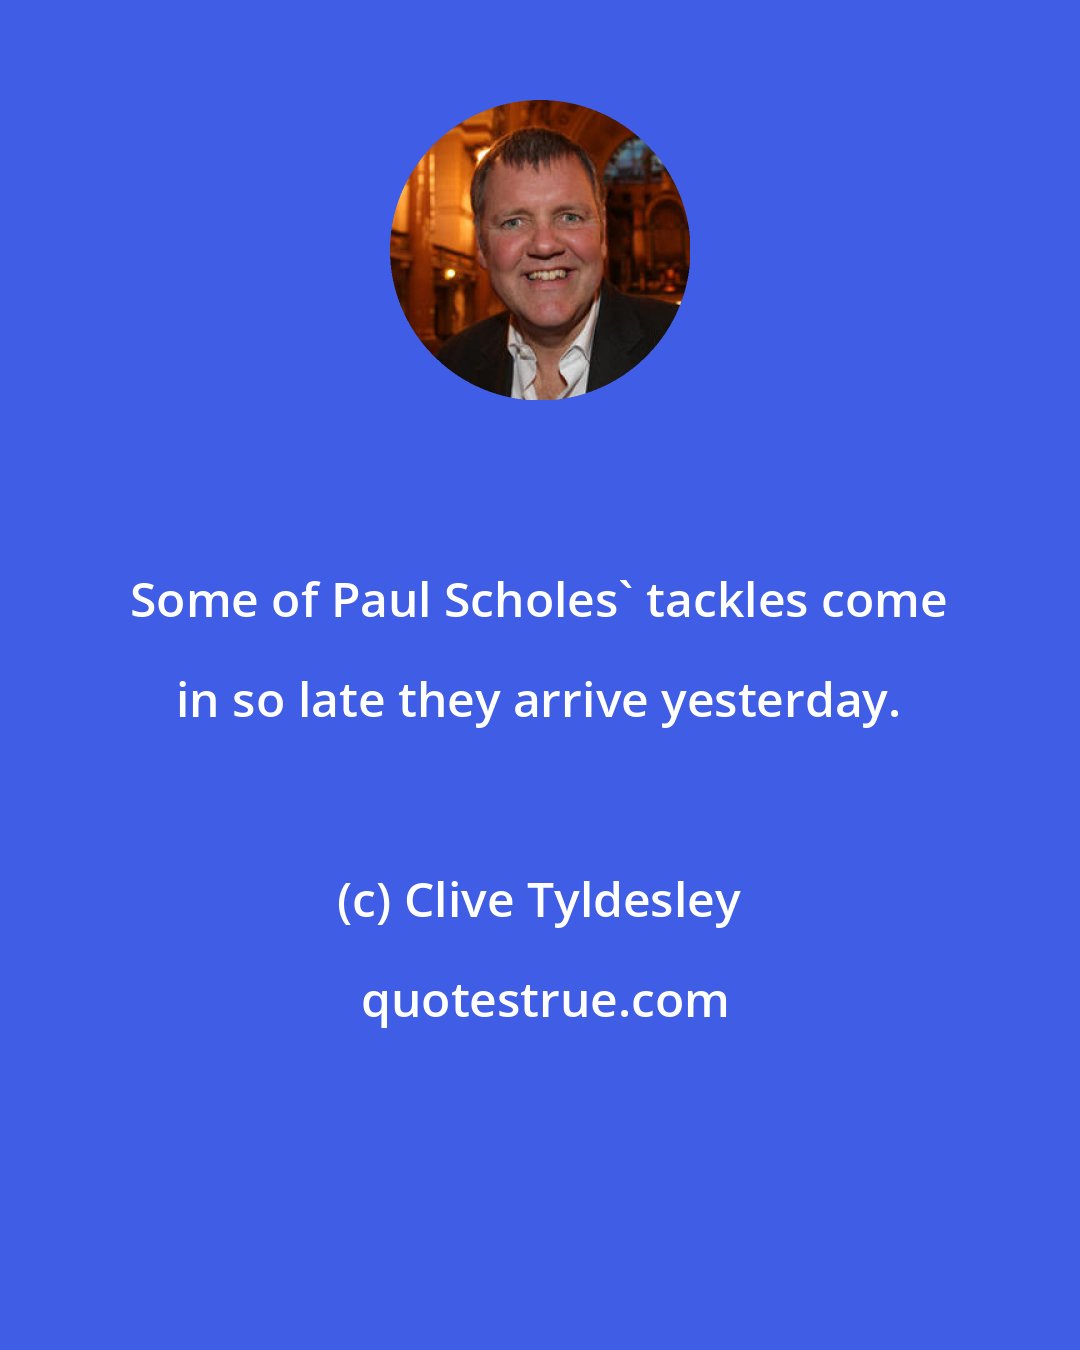 Clive Tyldesley: Some of Paul Scholes' tackles come in so late they arrive yesterday.